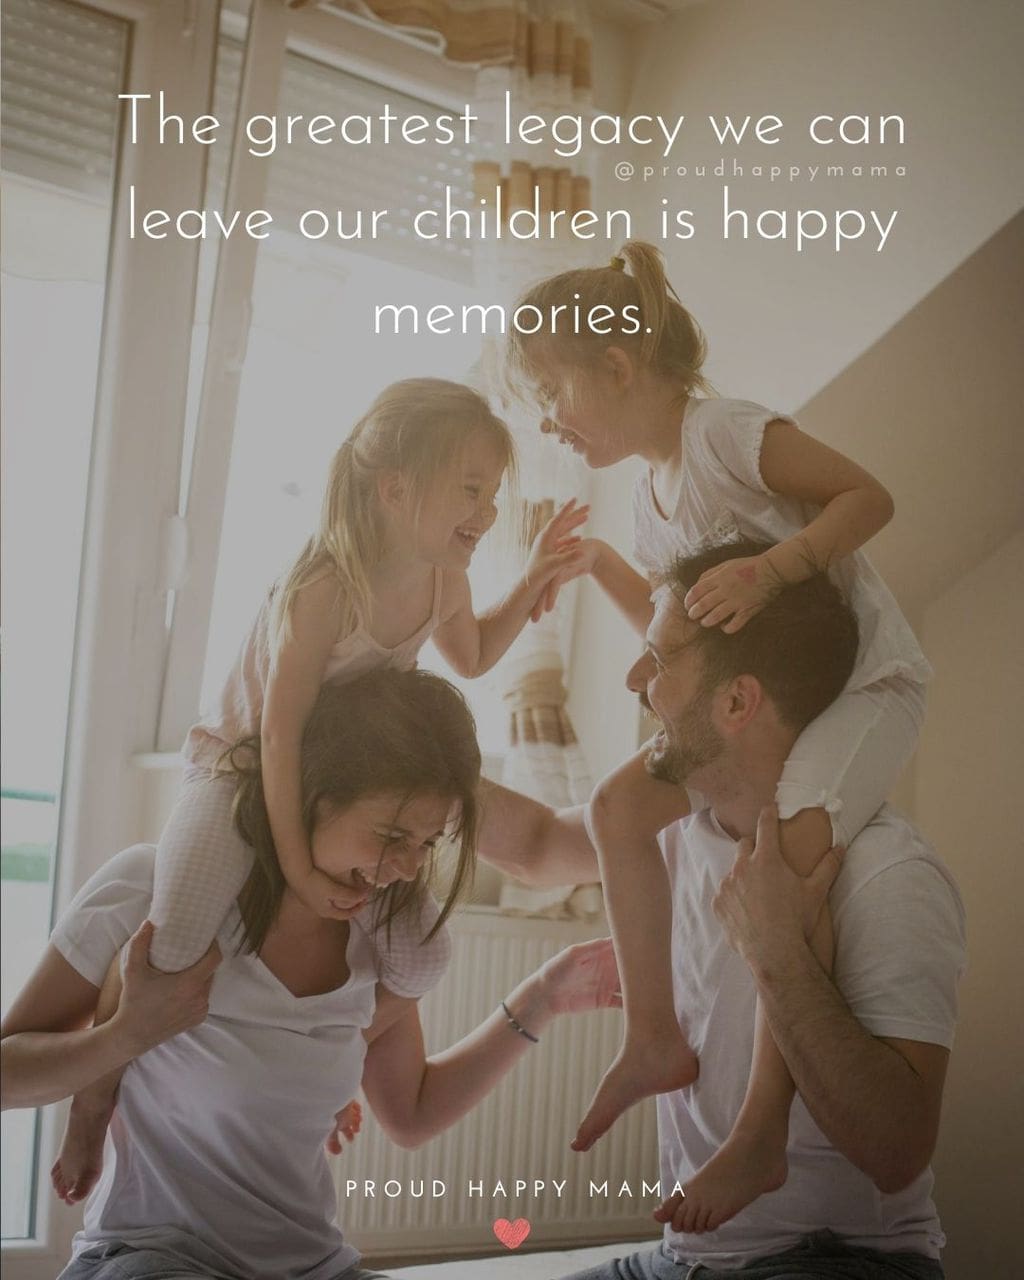 Quotes About A Family | The greatest legacy we can leave our children is happy memories.